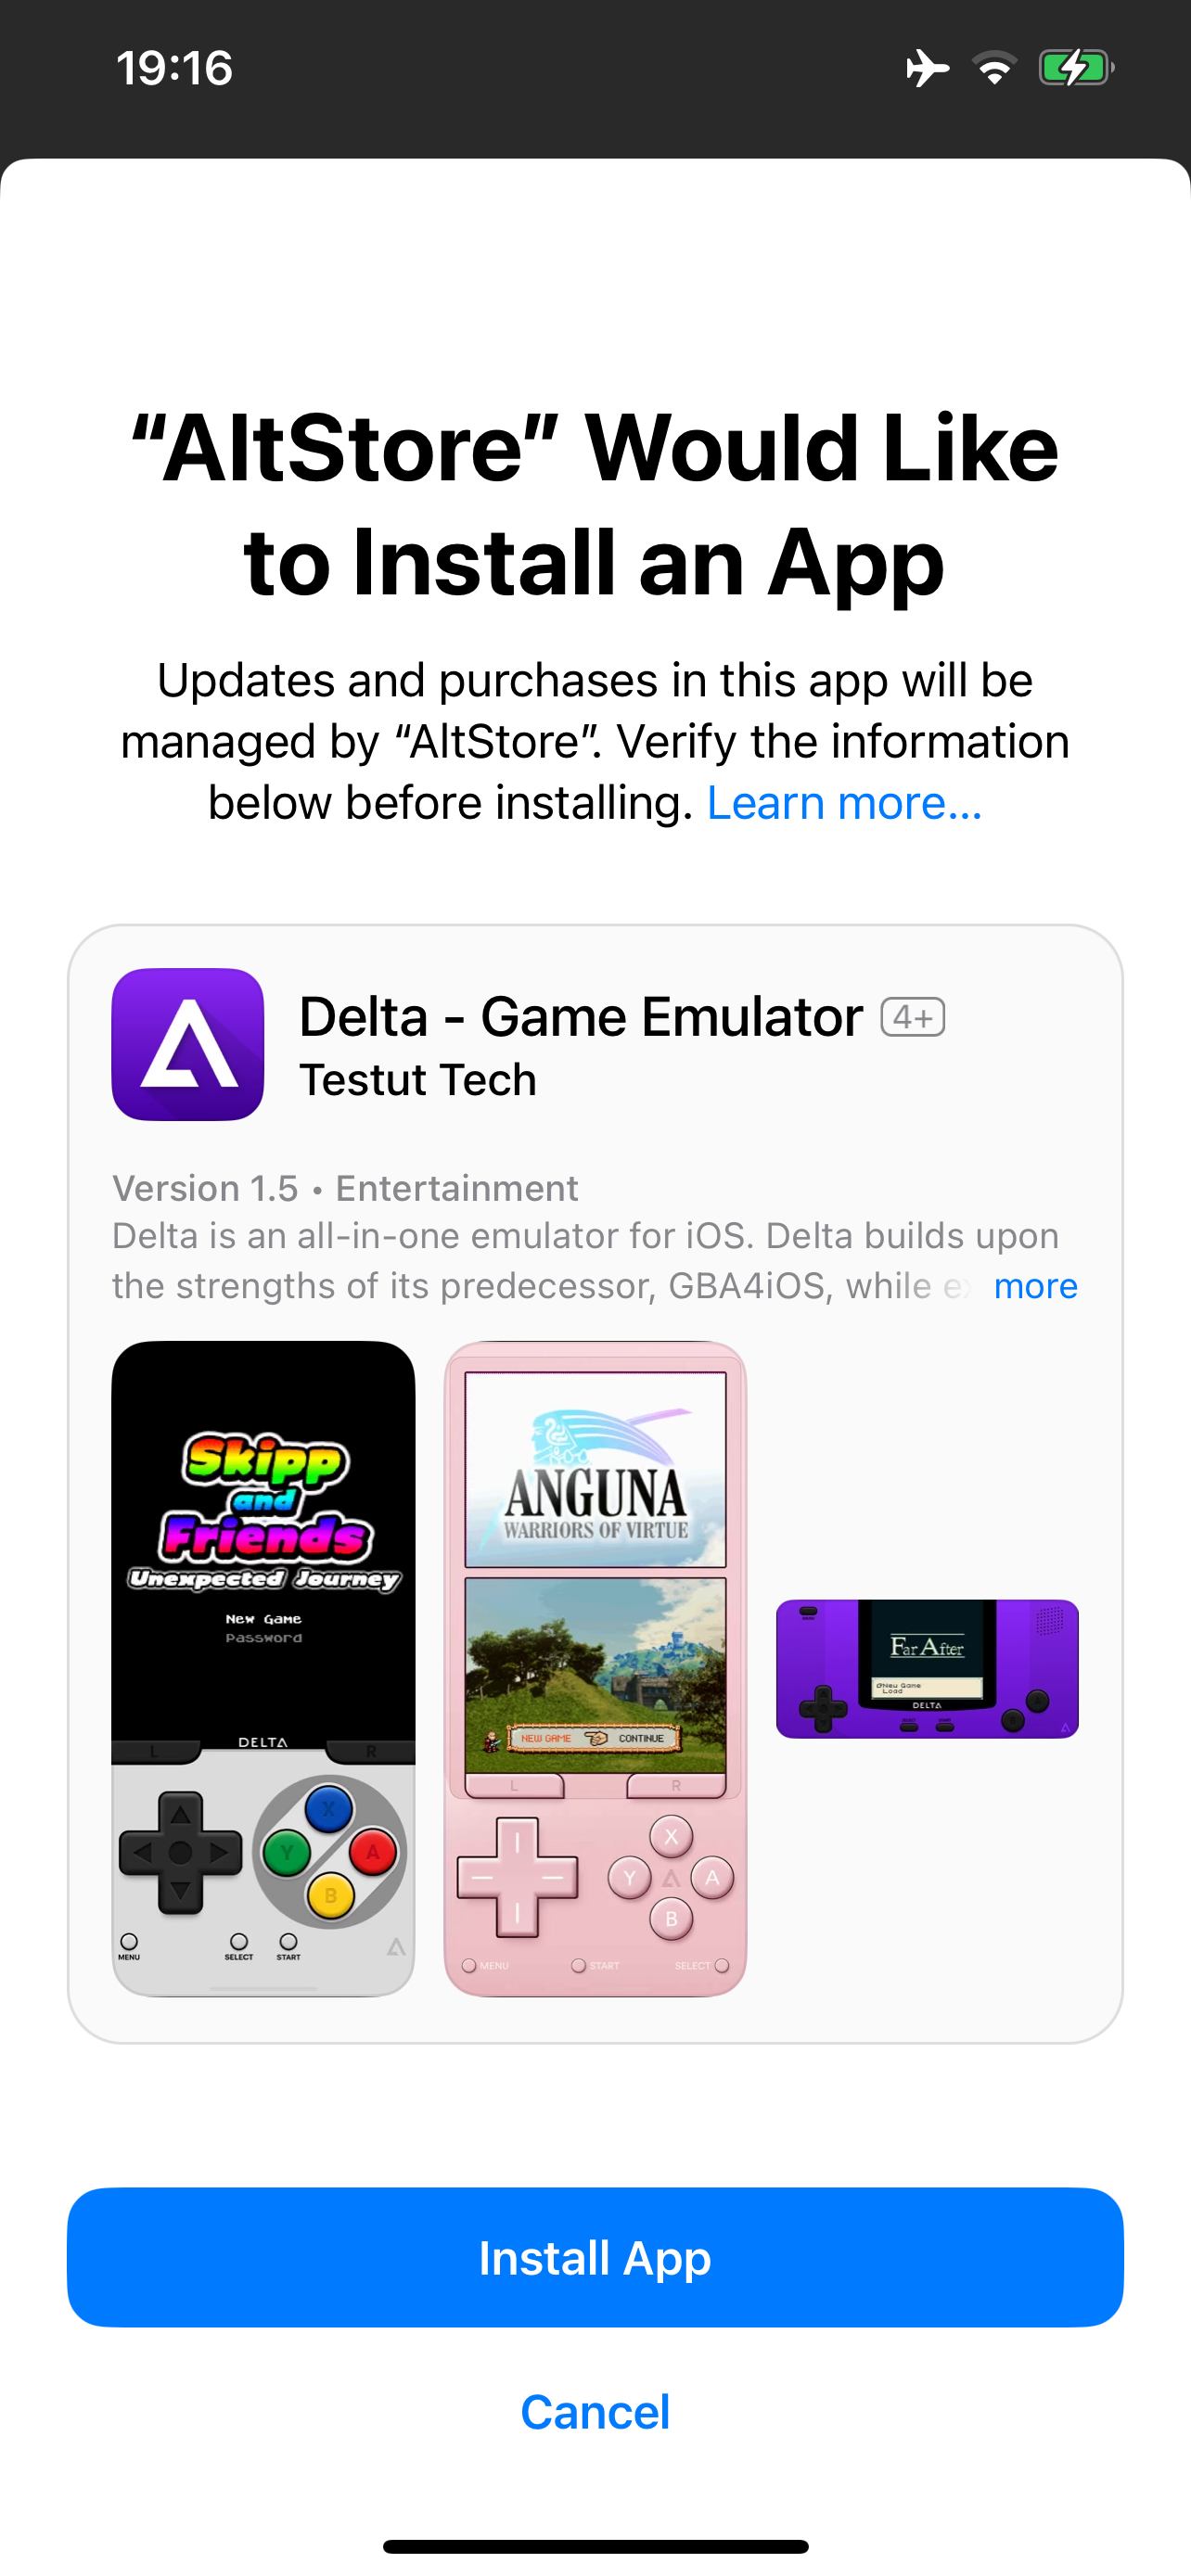 A full-screen prompt in AltStore: “AltStore” Would Like to Install an App Updates and purchases in this app will be managed by “AltStore”. Verify the information below before installing. Learn more… There is then a description and screenshots of the app, followed by buttons: [Install App] with blue background, [Cancel] with neutral blue text